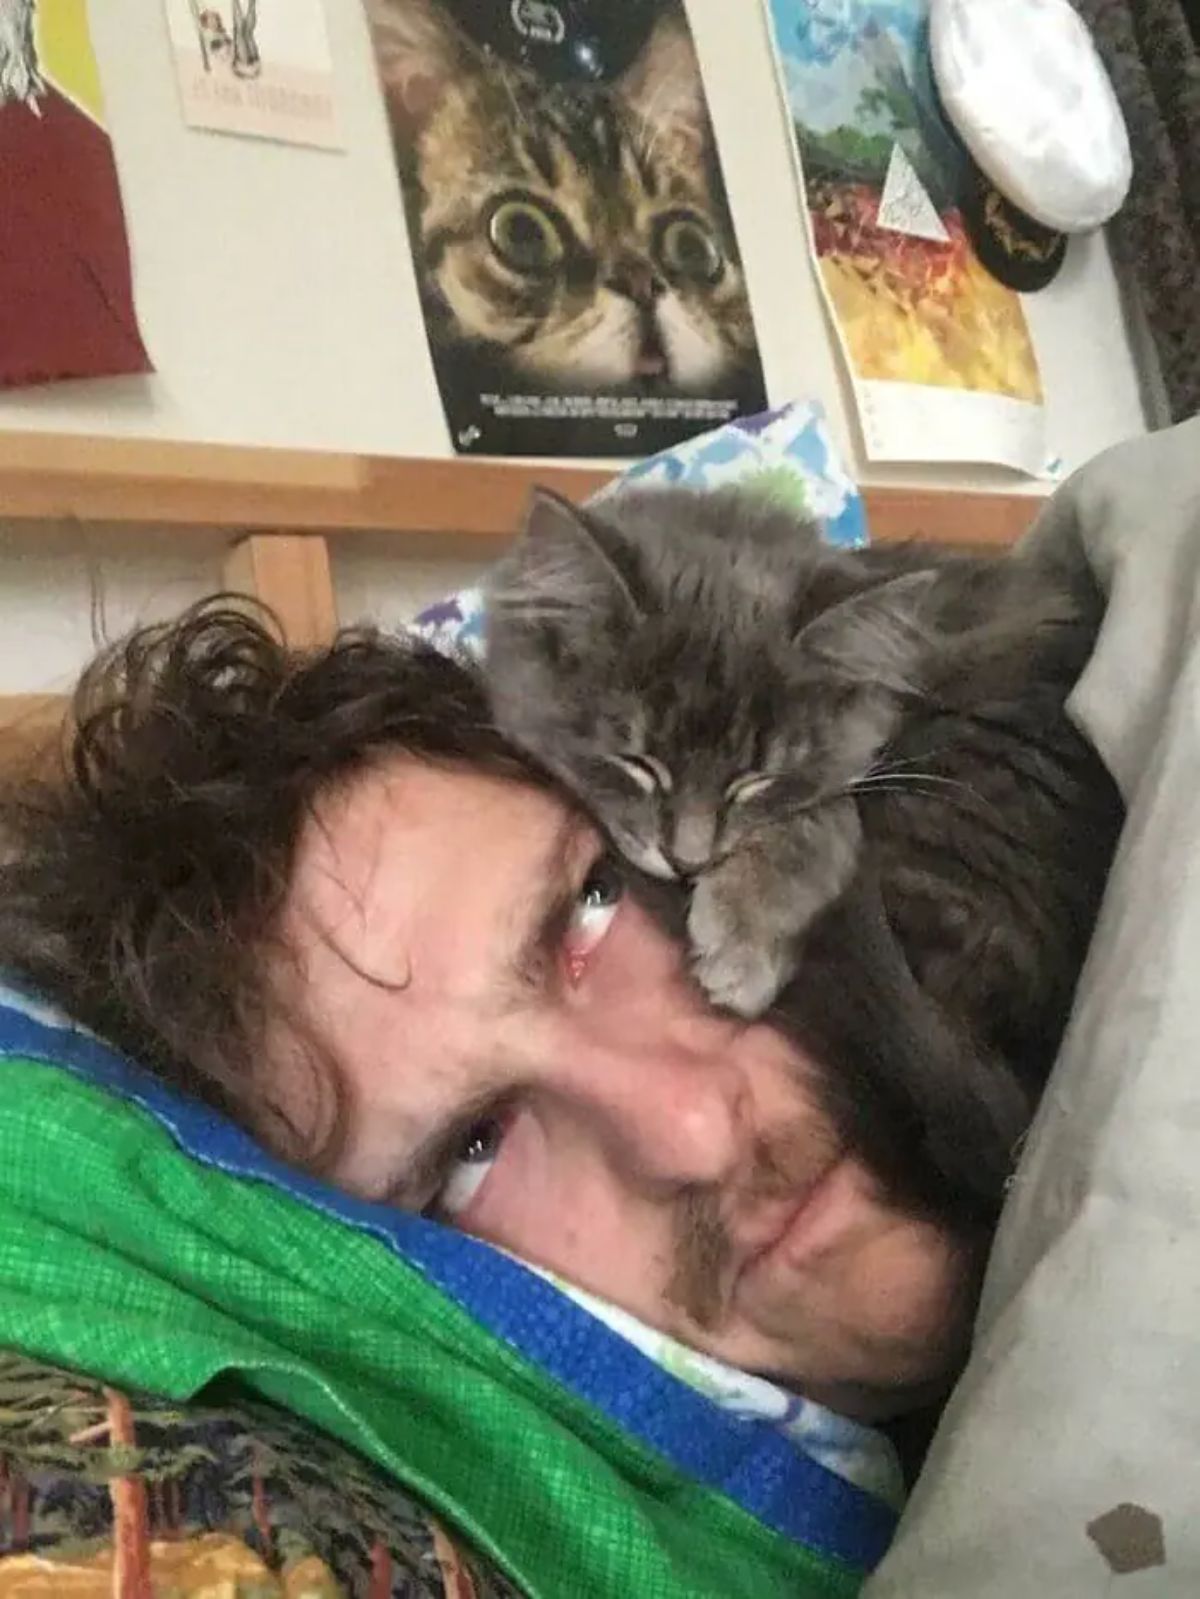 grey cat sleeping on a man's face with the man sleeping sideways and frowning up at the cat